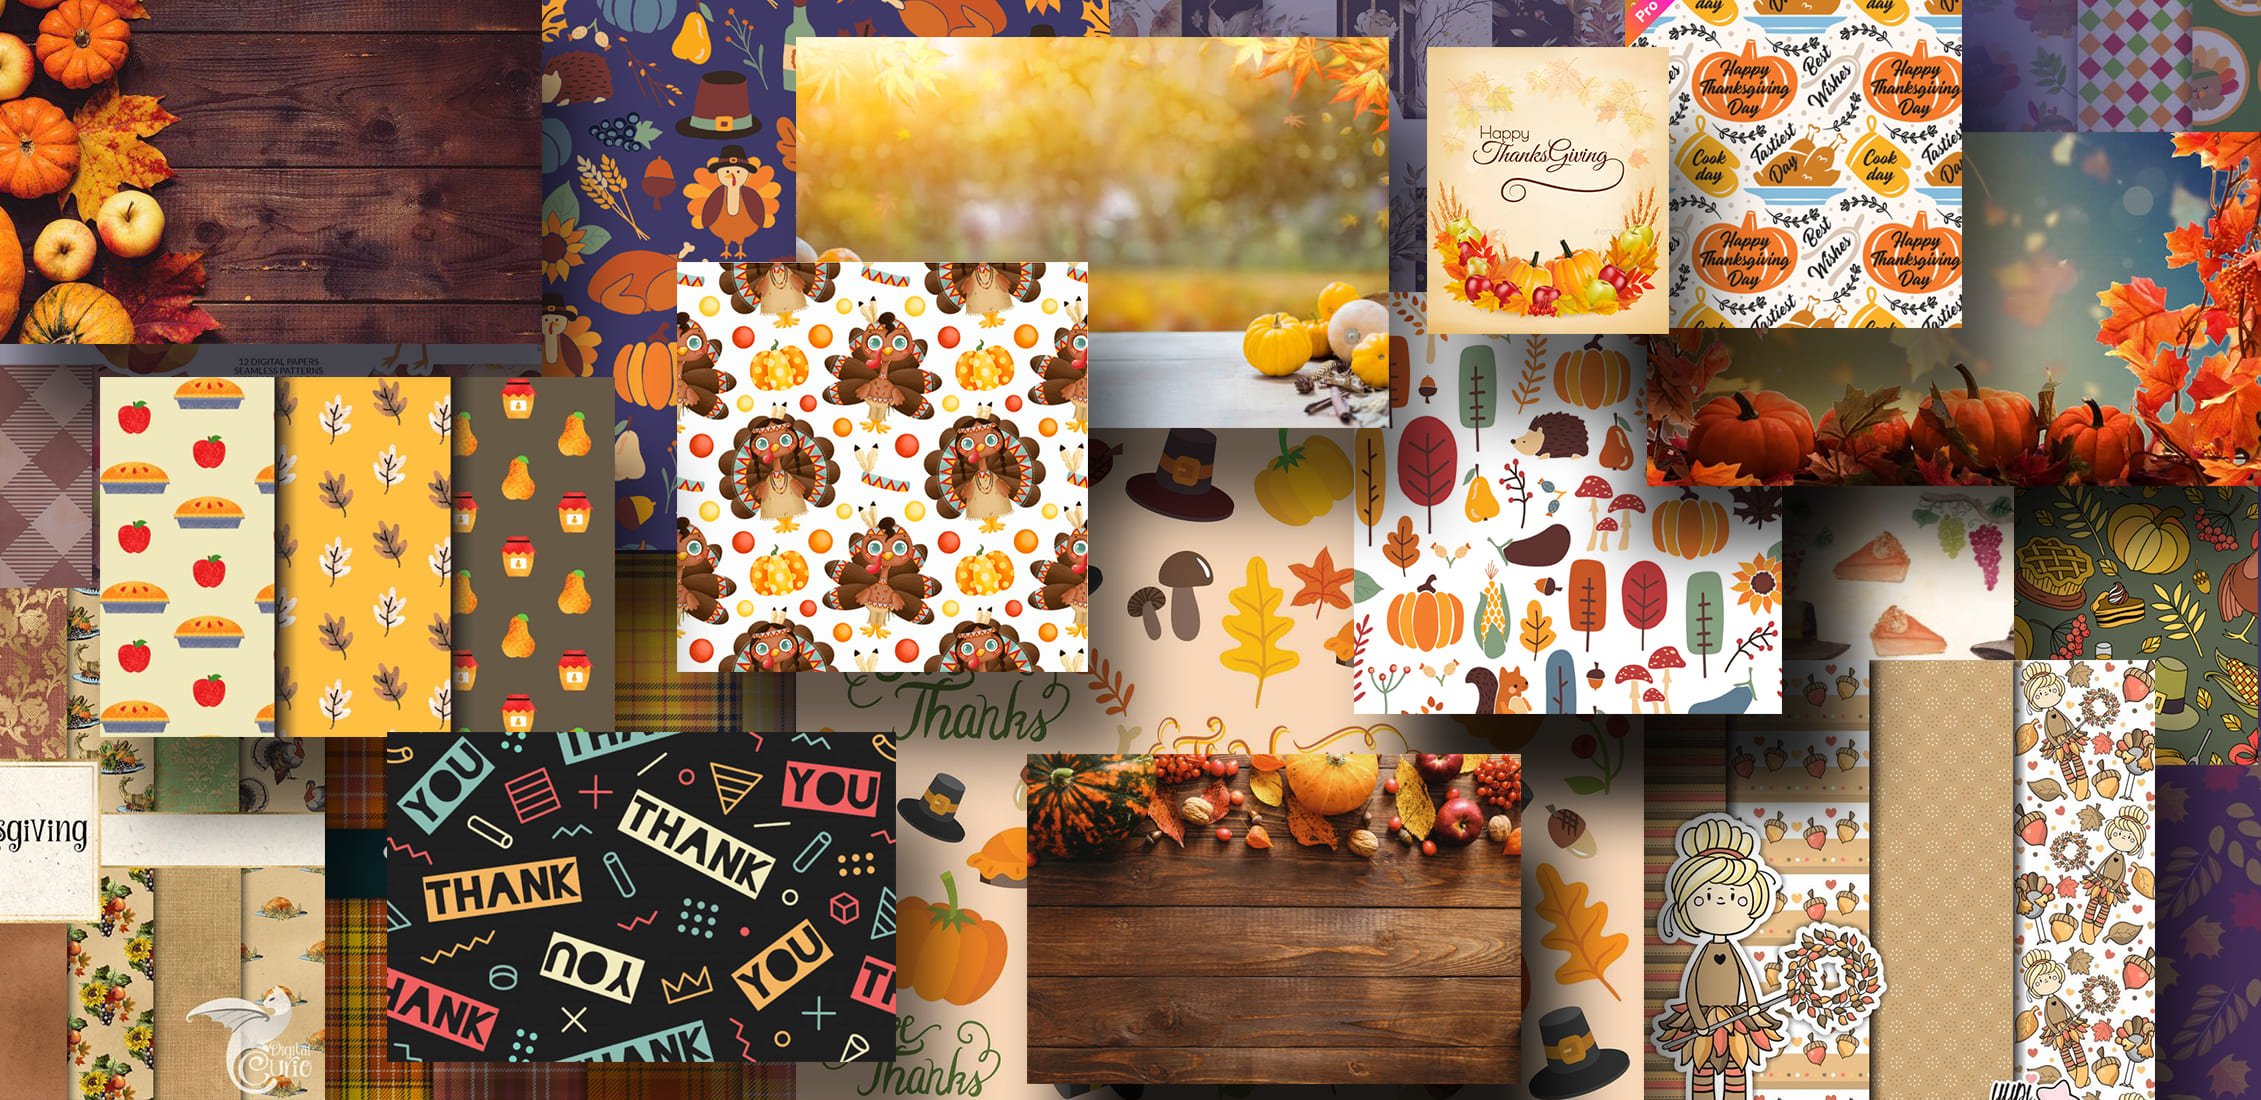 Best Thanksgiving Background Images.